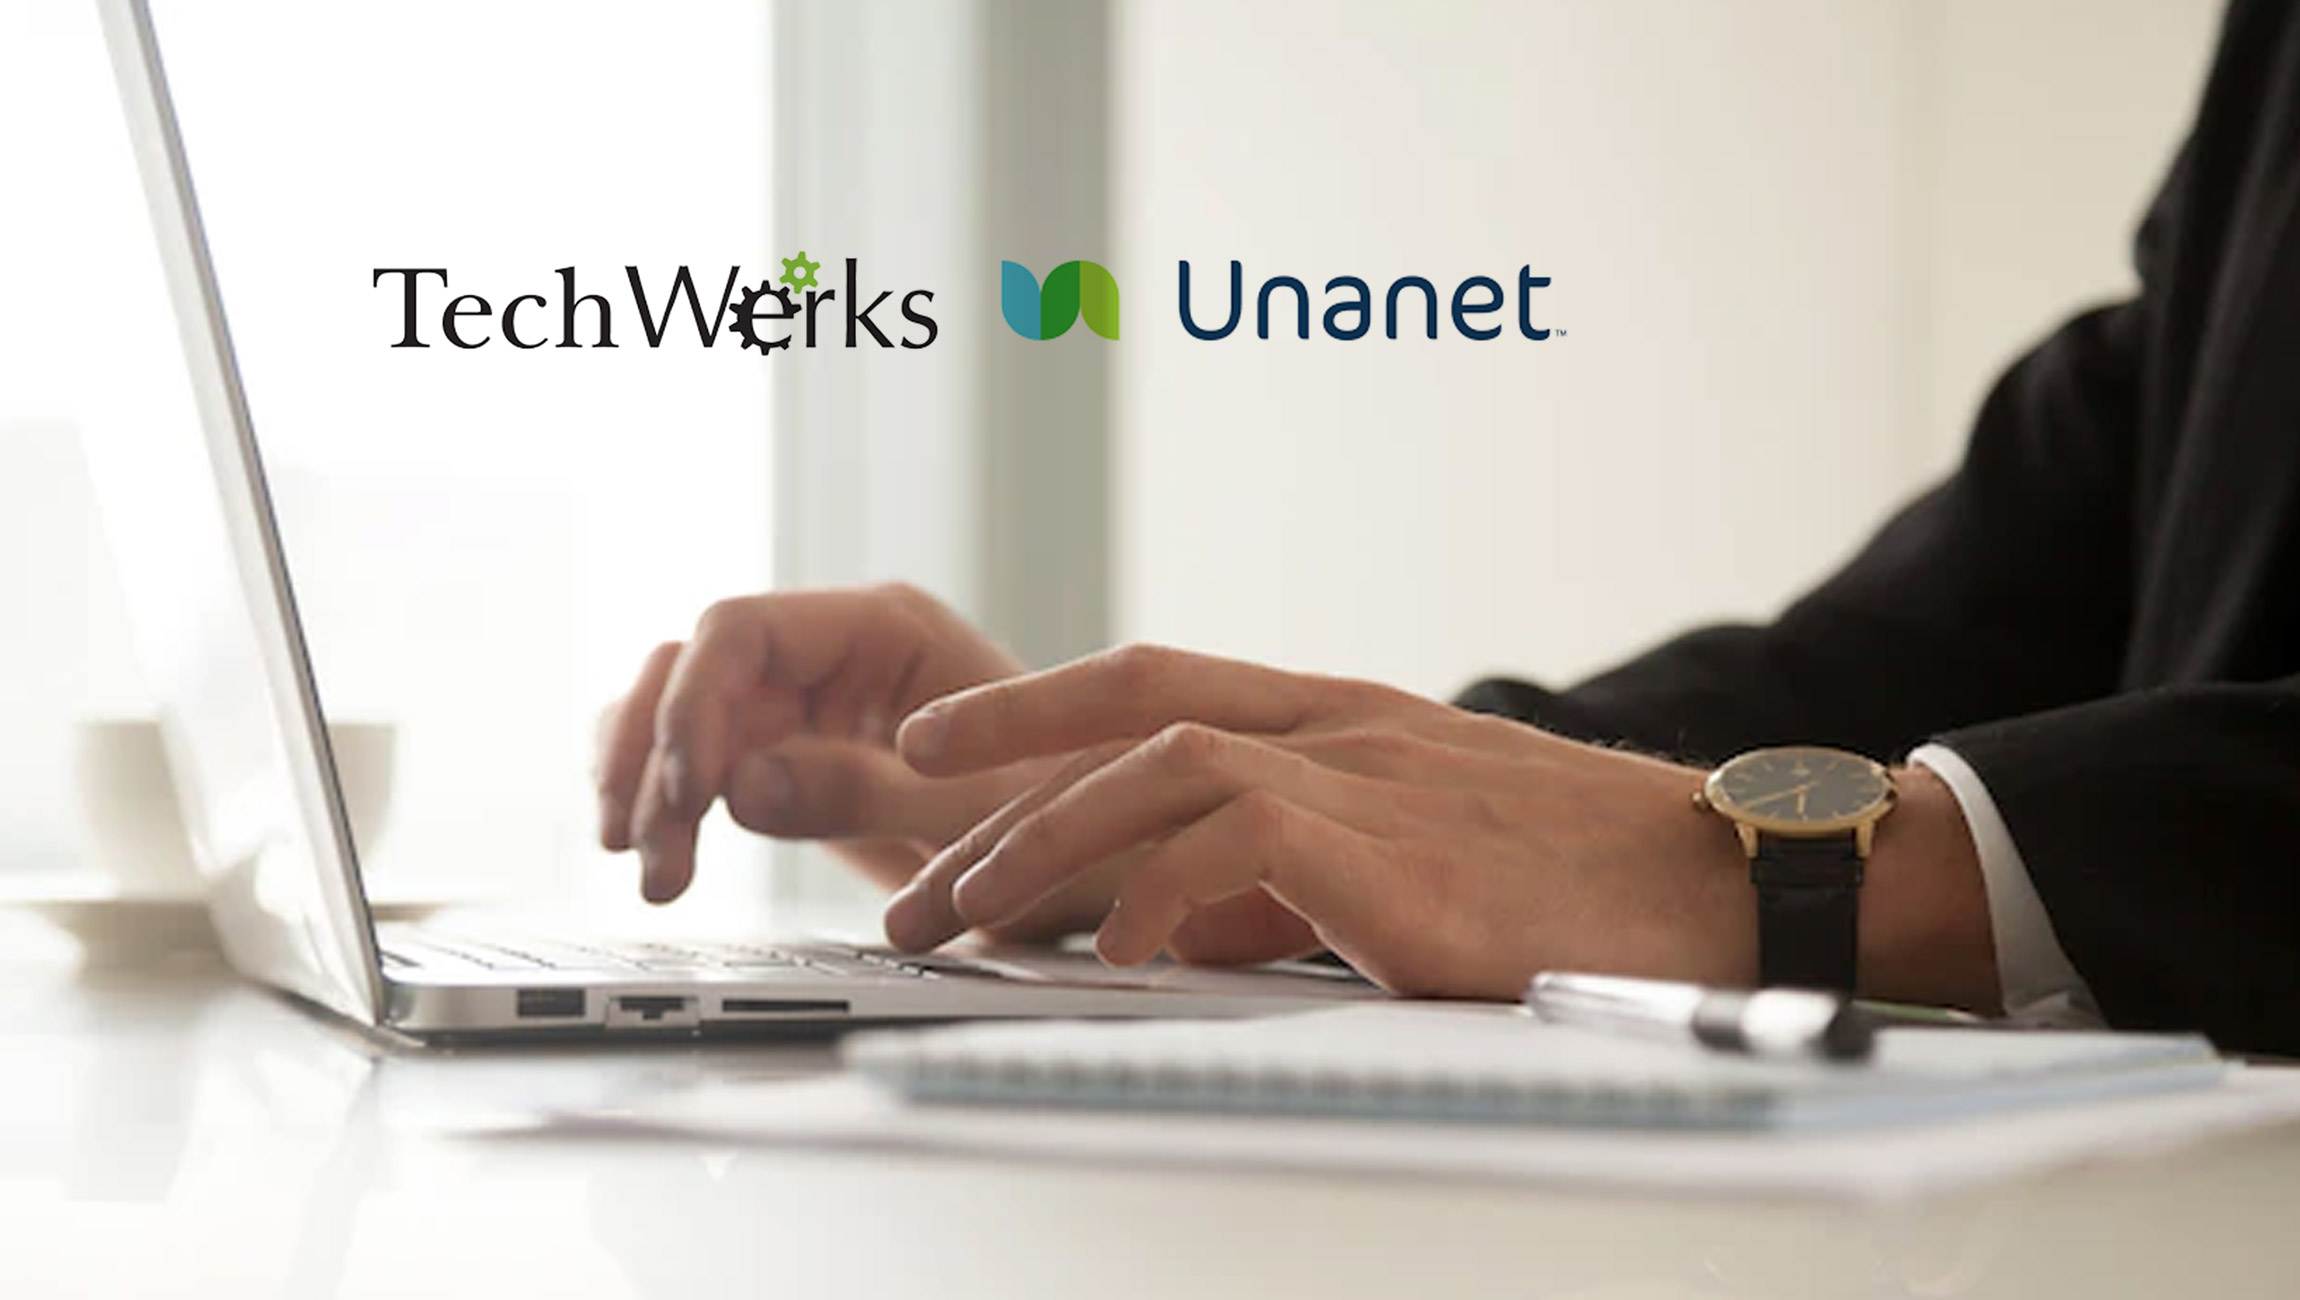 TechWerks-Upgrades-to-Unanet-ERP-GovCon-For-Improved-Operations-and-Project-Management